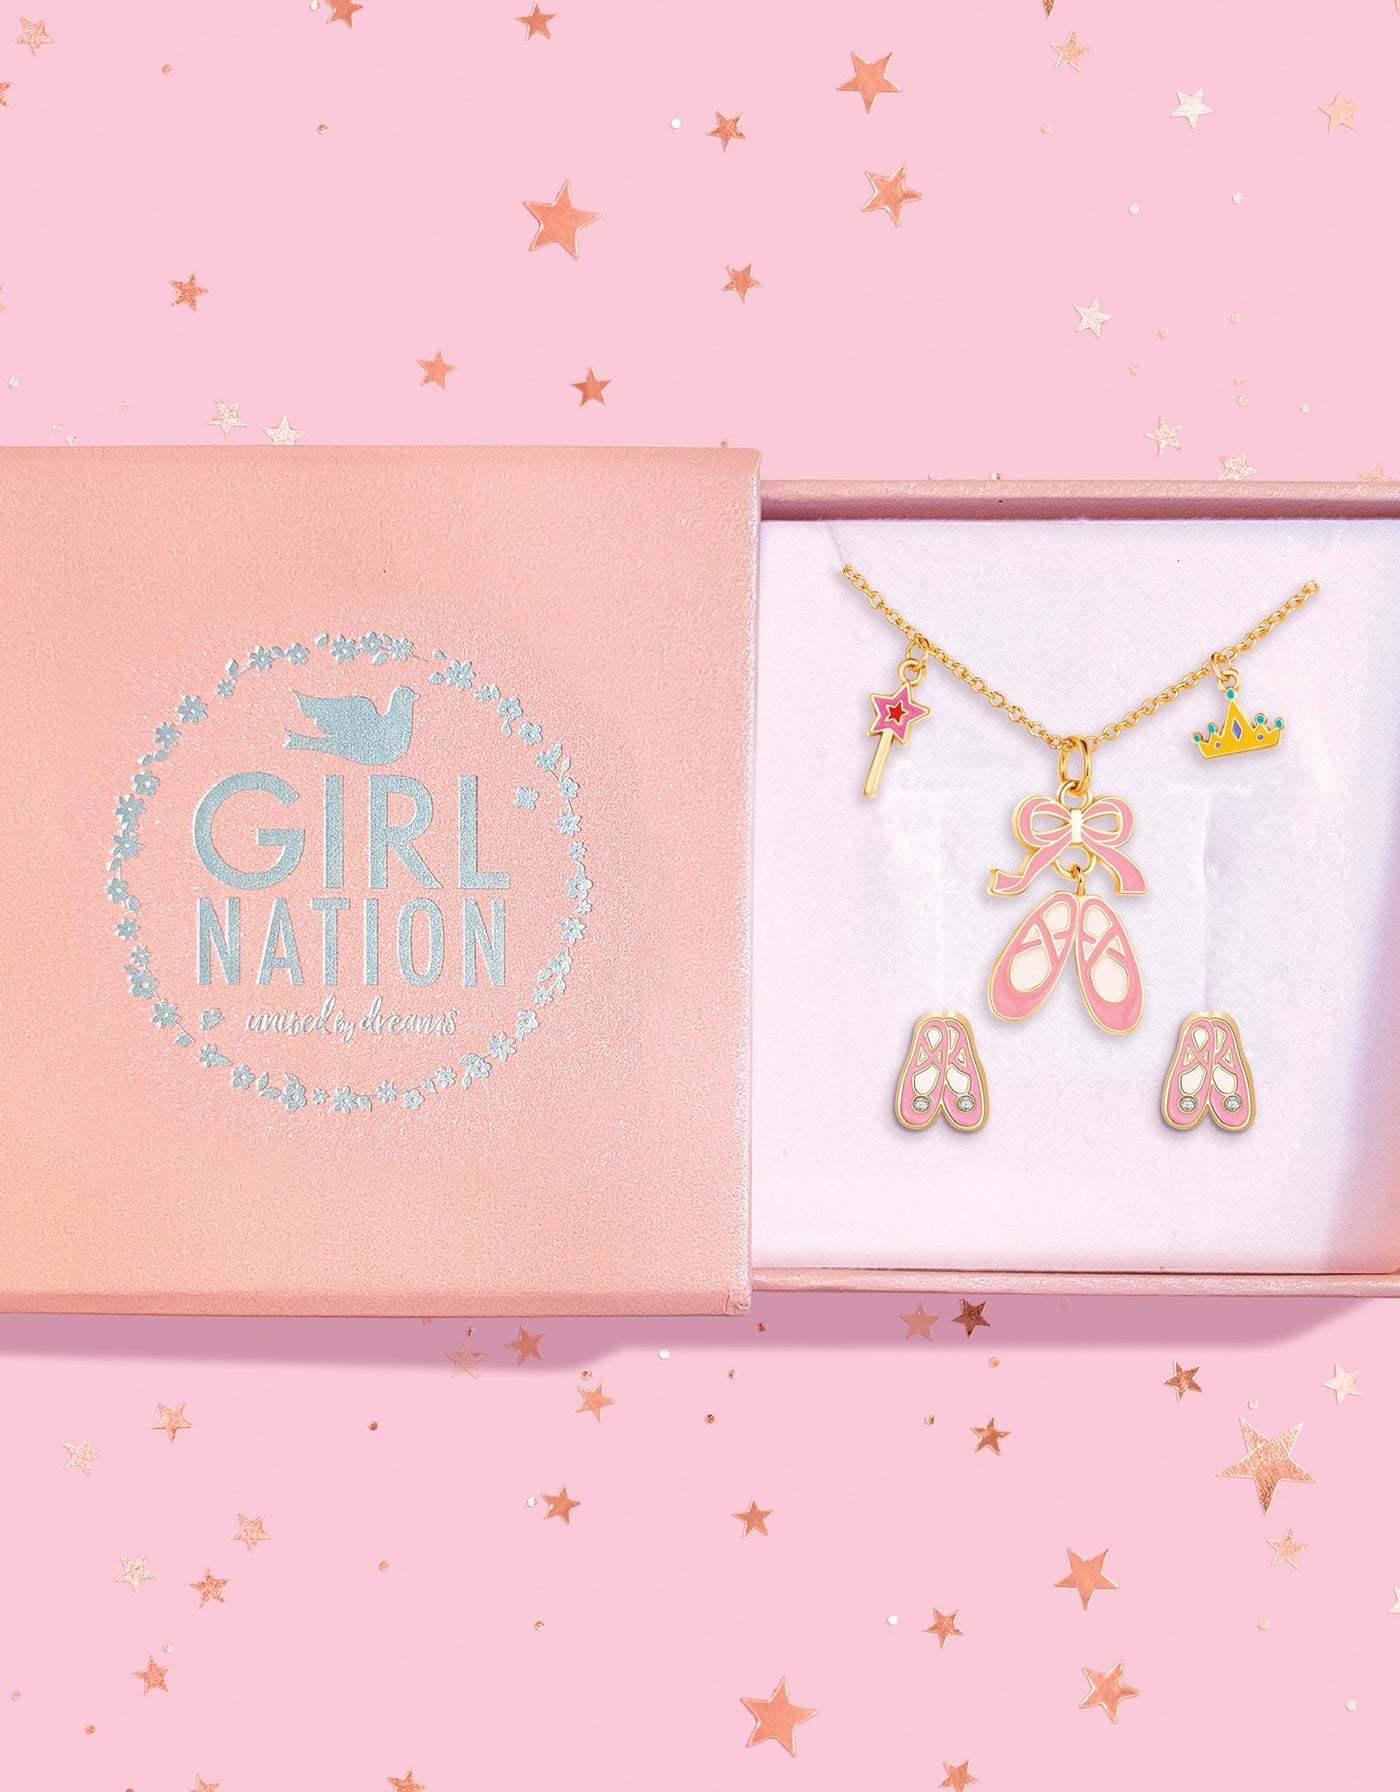 Fantasy necklace and earrings gift set - Ballet slippers - Girl Nation